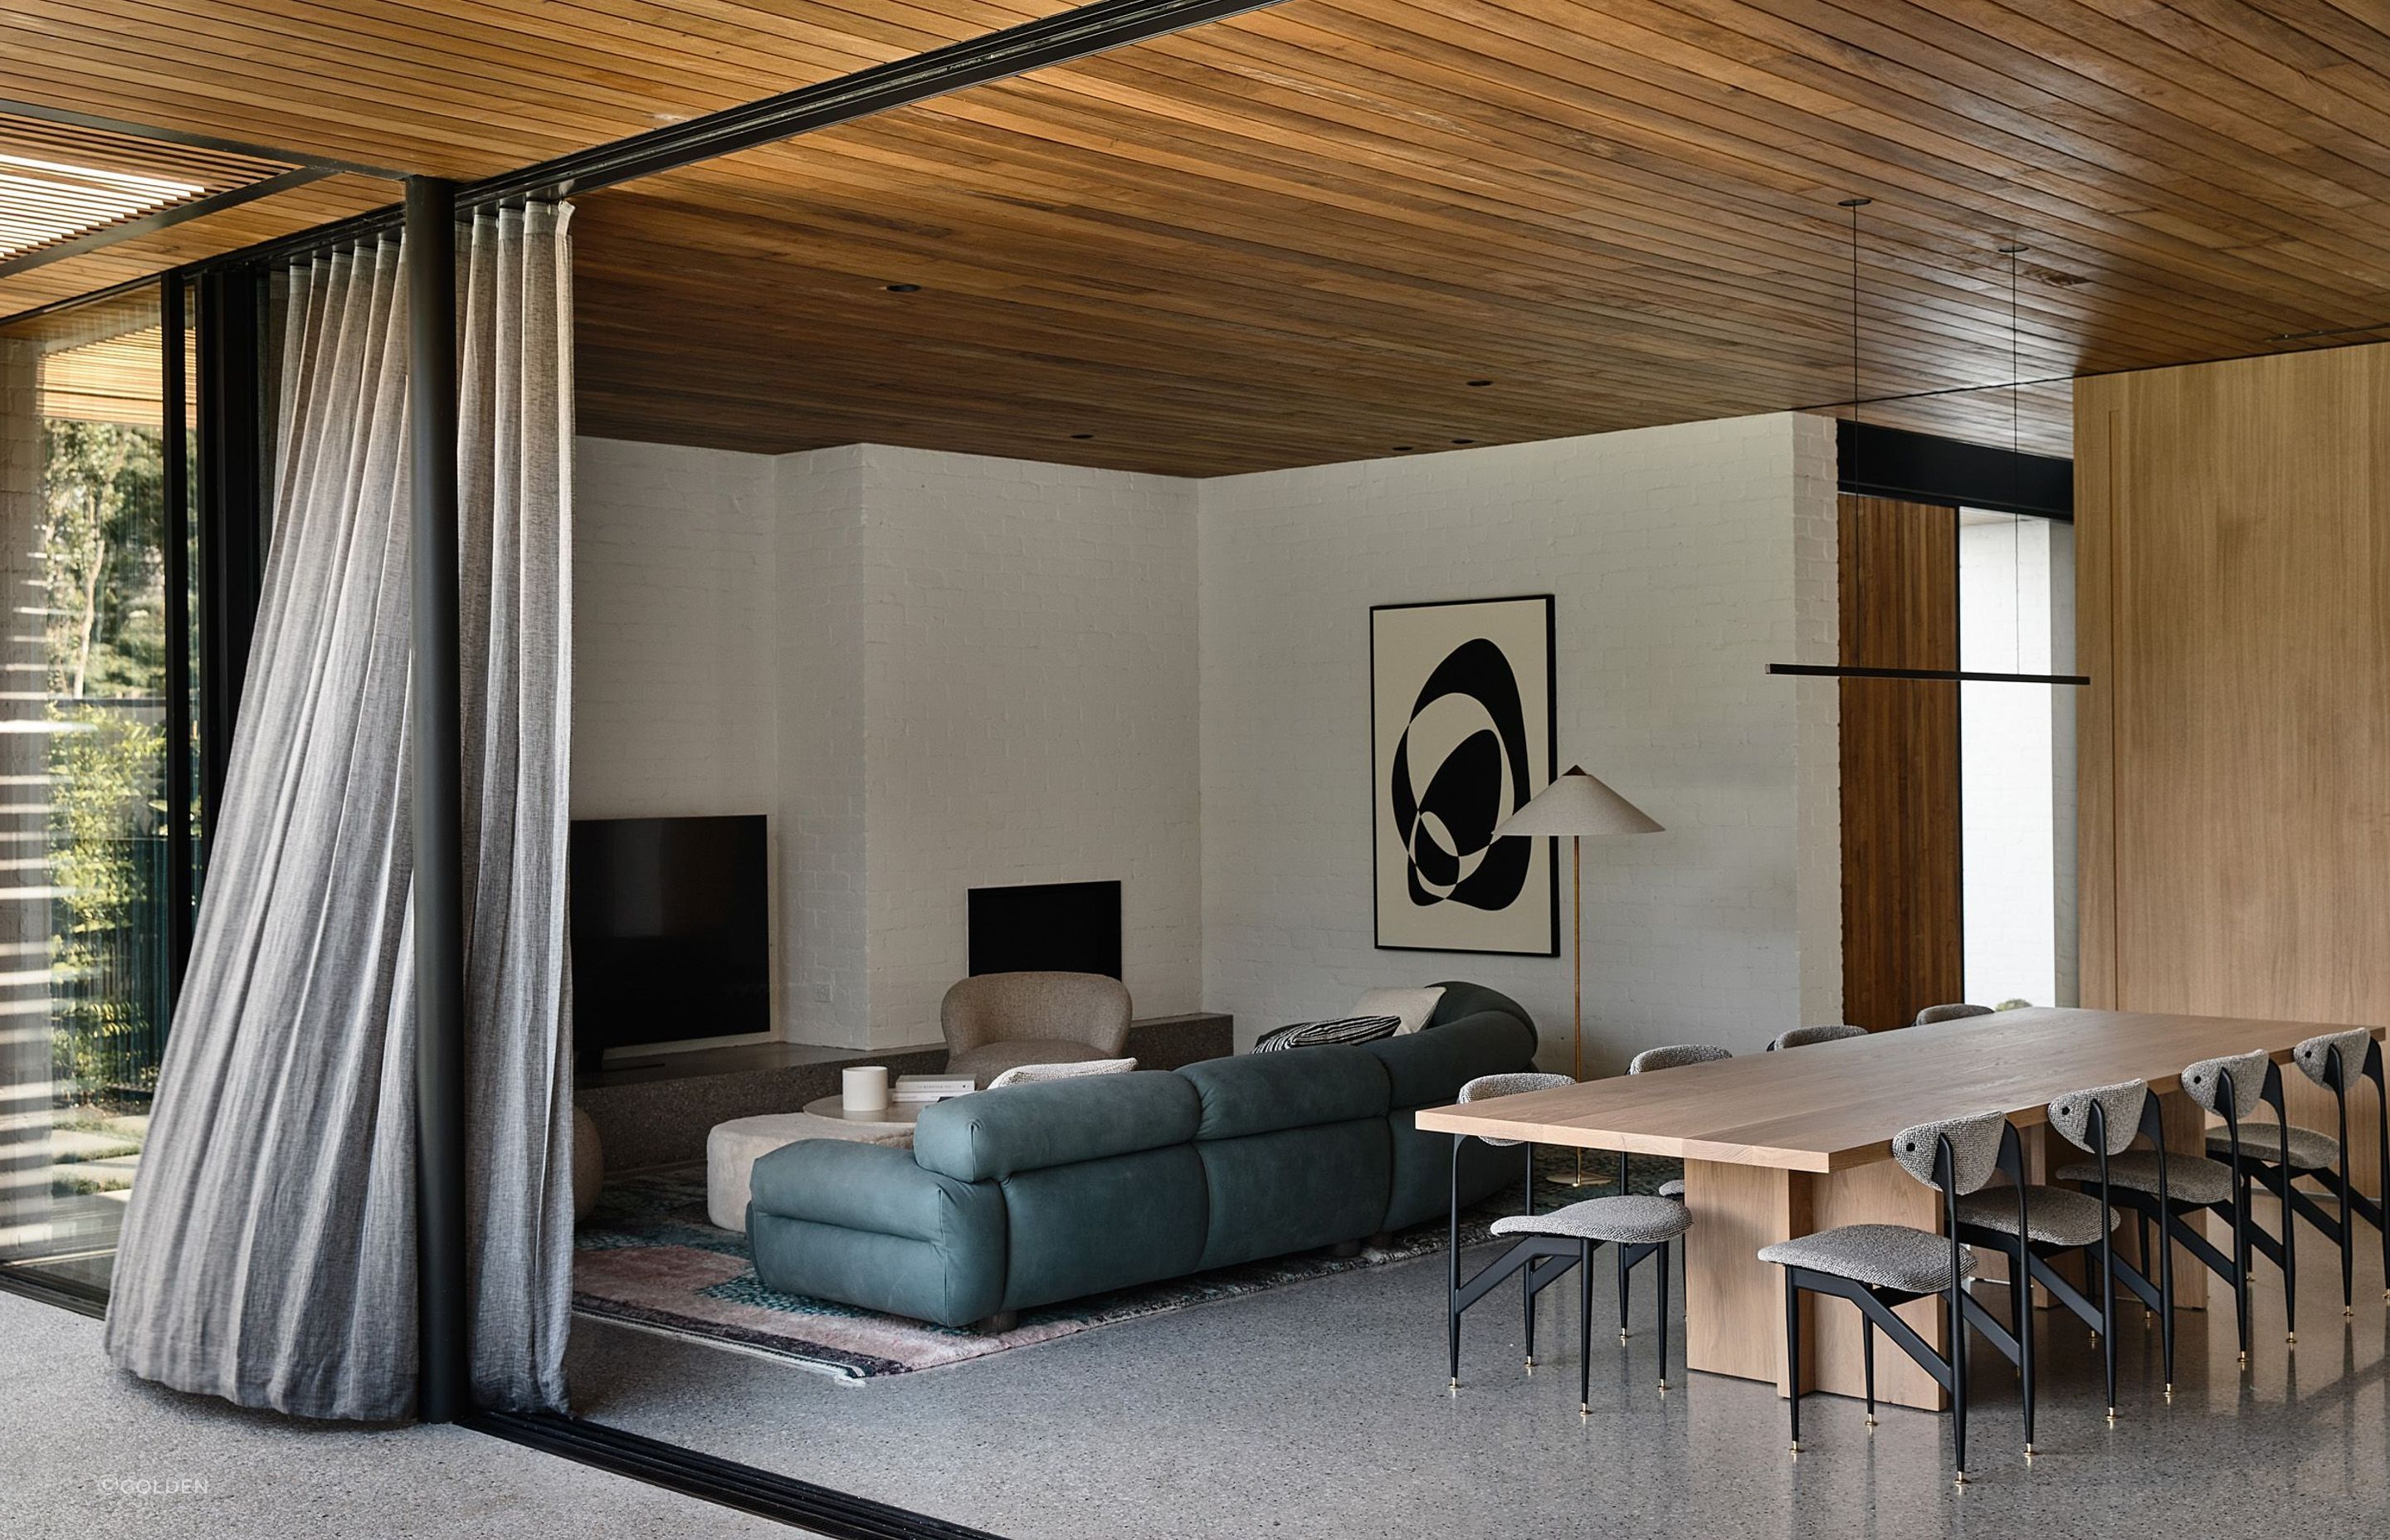 Teak ceilings, large oak doors and wall panels add warmth to the interior and contrast beautifully with the concrete floors in this mid-20th century inspired home - Photography: Derek Swalwell